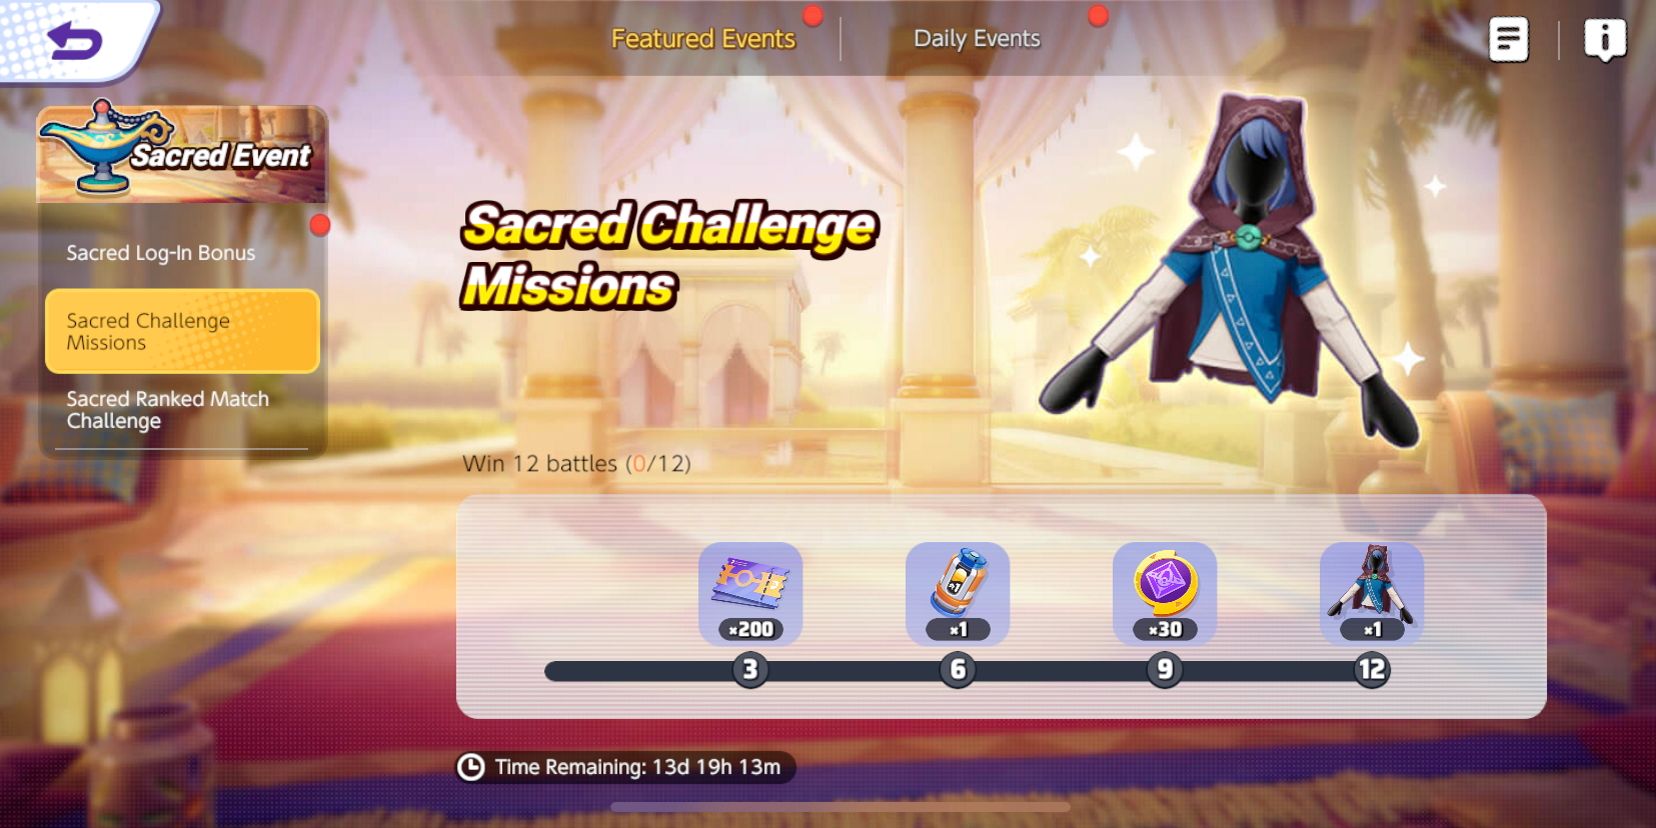 Pokemon Unite Sacred Event Challenge Mission screen showing the different rewards